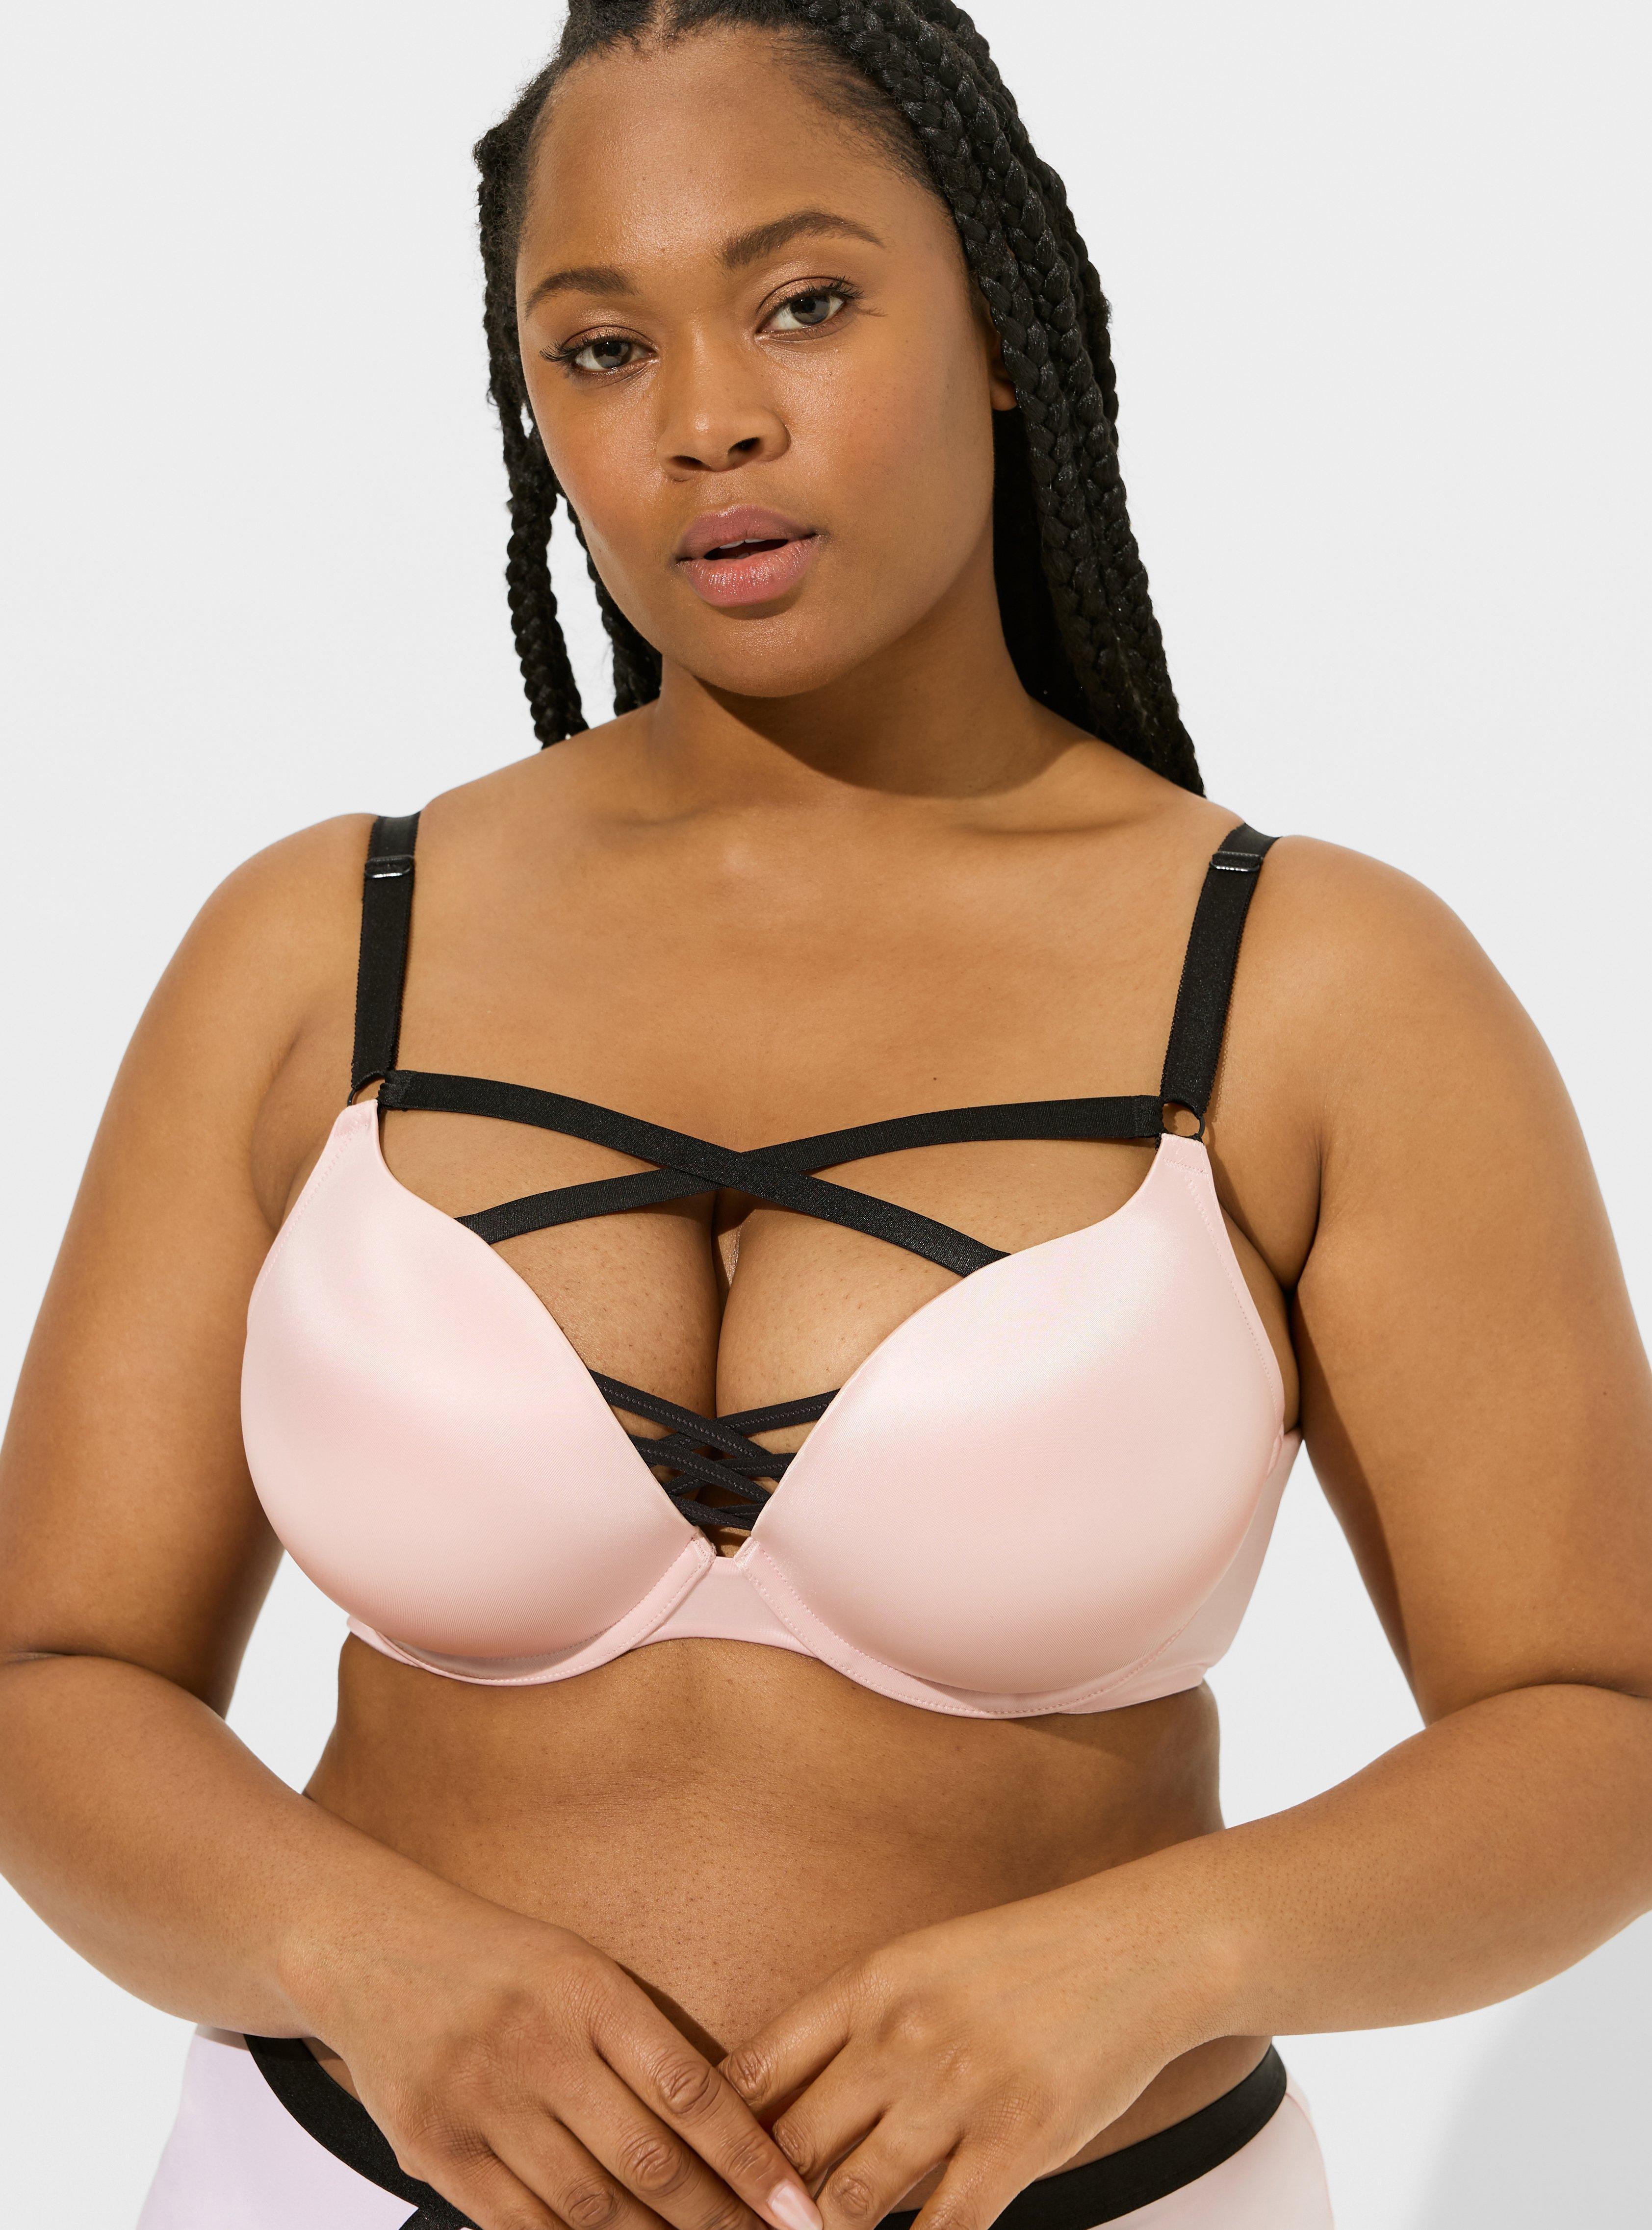 Torrid Curve Bra Full Coverage 50C Gray Lightly Padded Underwire Size  undefined - $24 - From Kris